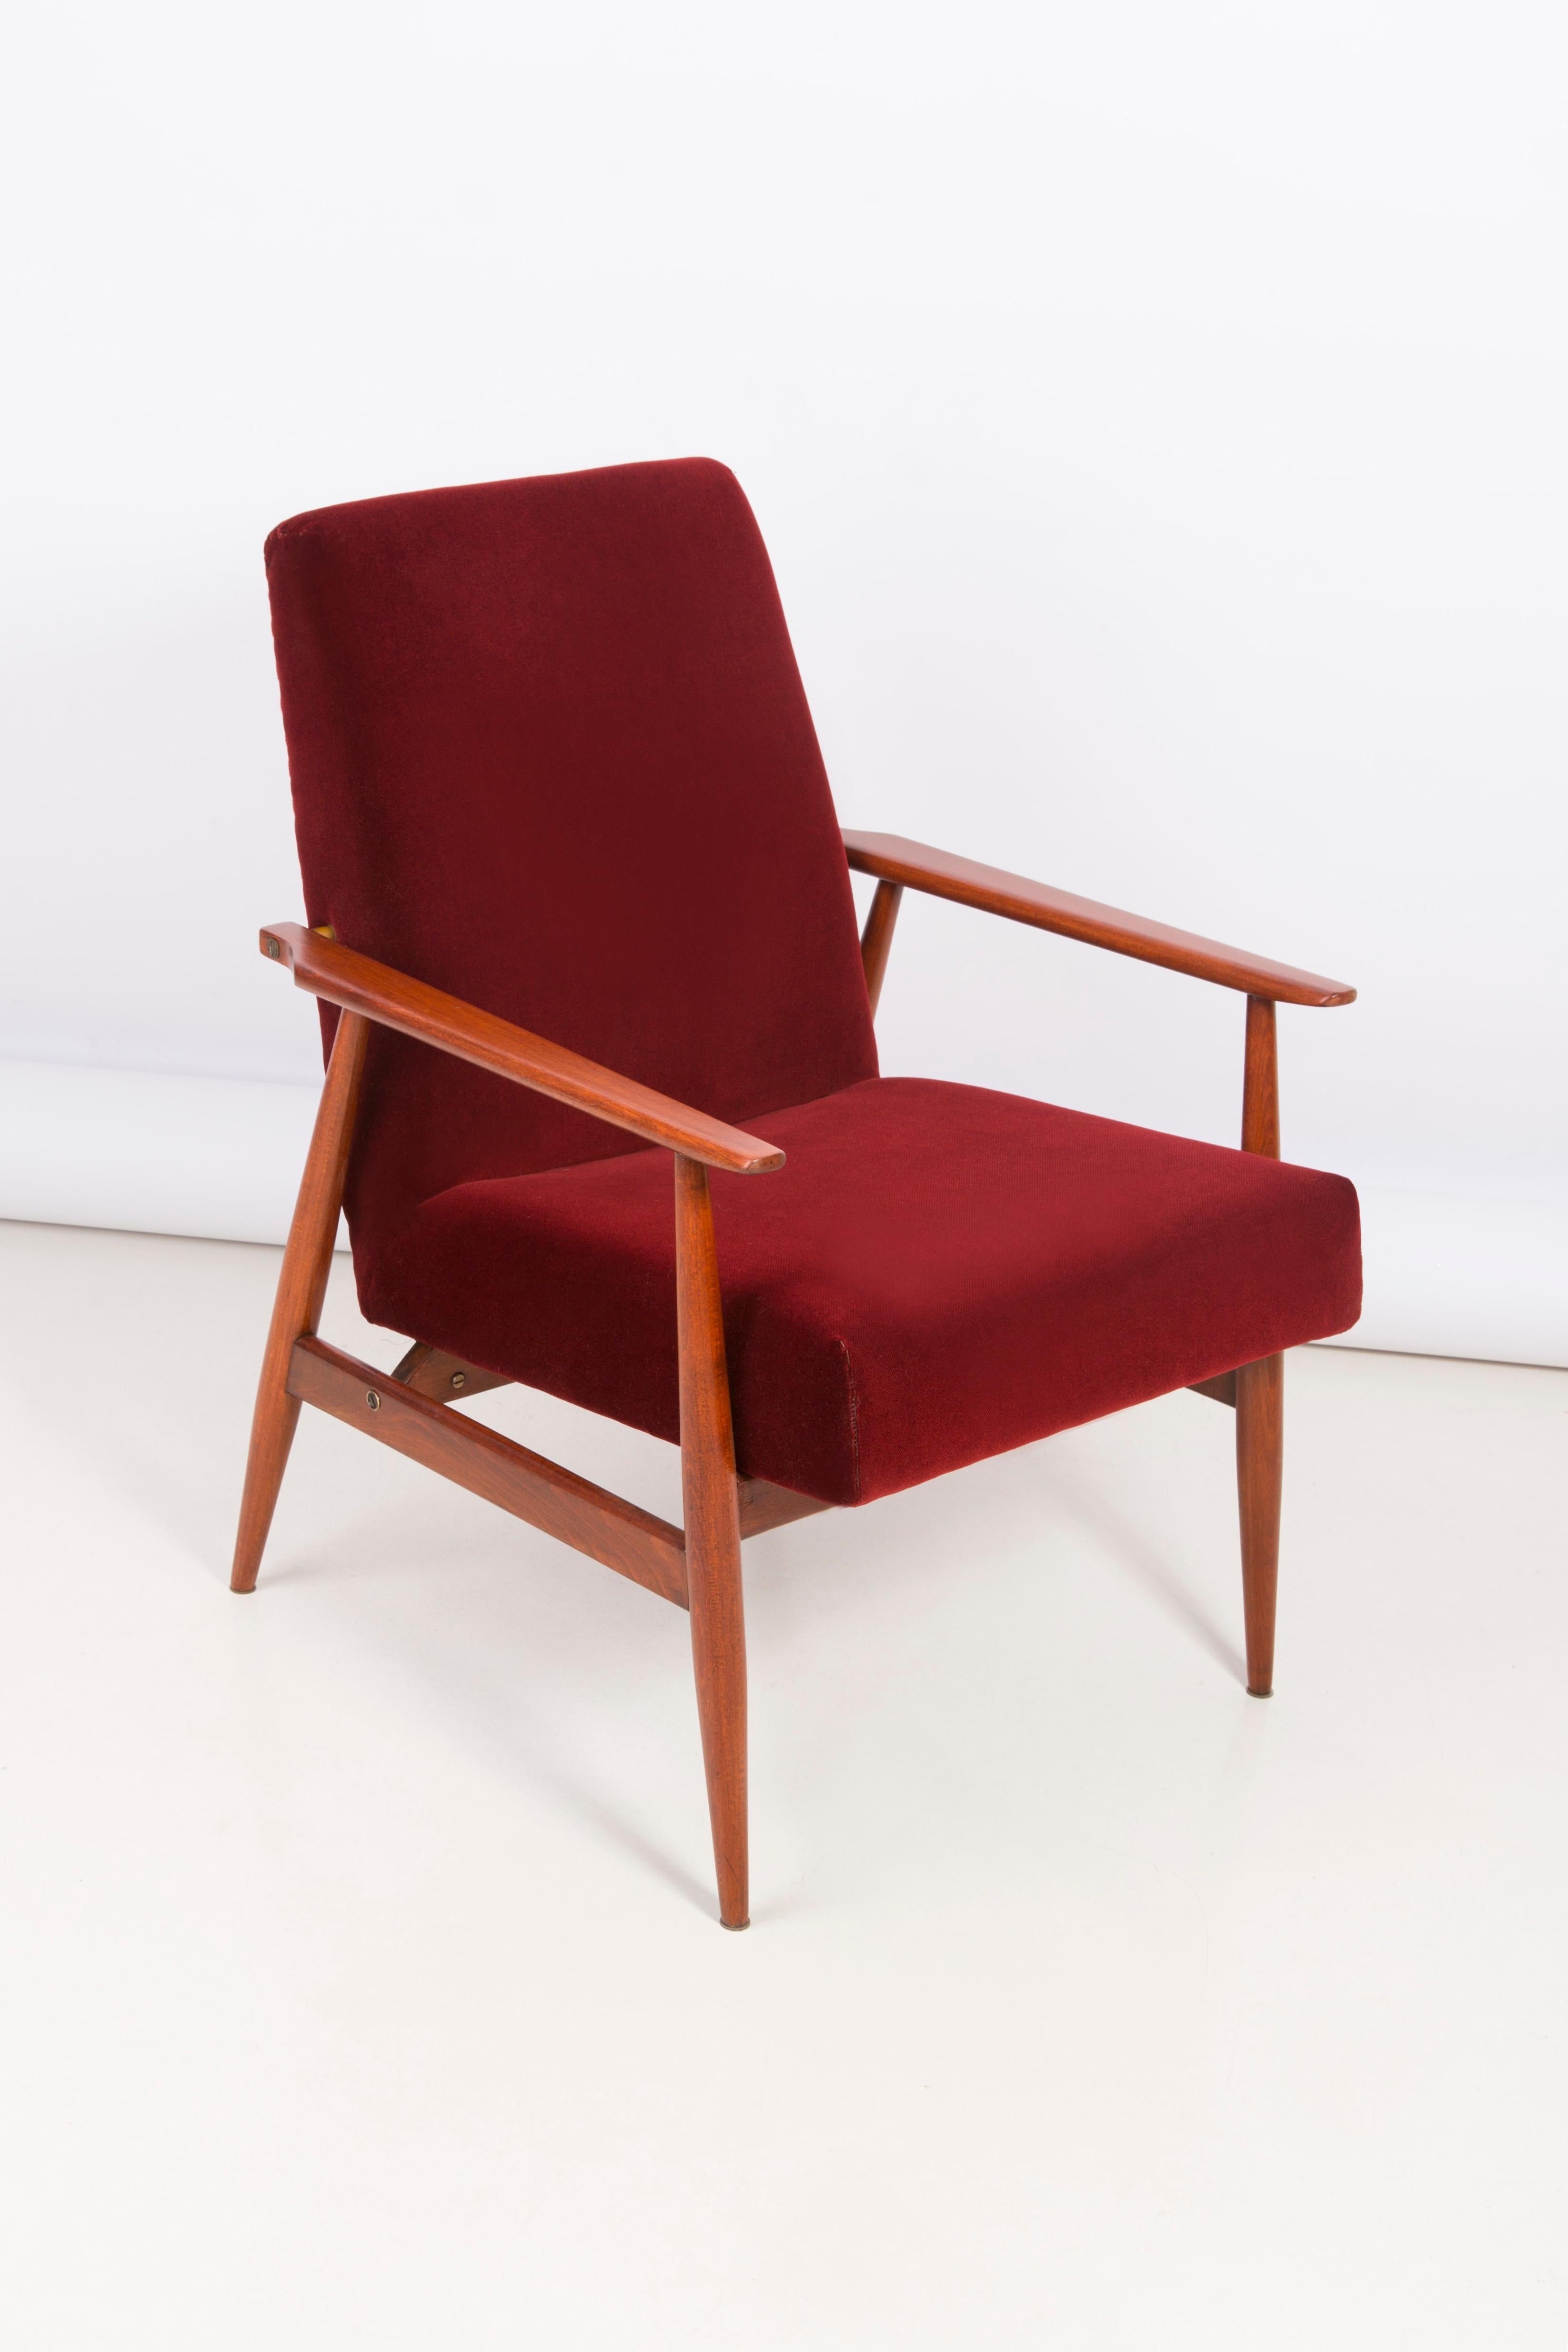 A beautiful, restored armchair designed by Henryk Lis. Furniture after full carpentry and upholstery renovation. The fabric, which is covered with a backrest and a seat, is a high-quality velour upholstery. The armchair will be perfect in Minimalist